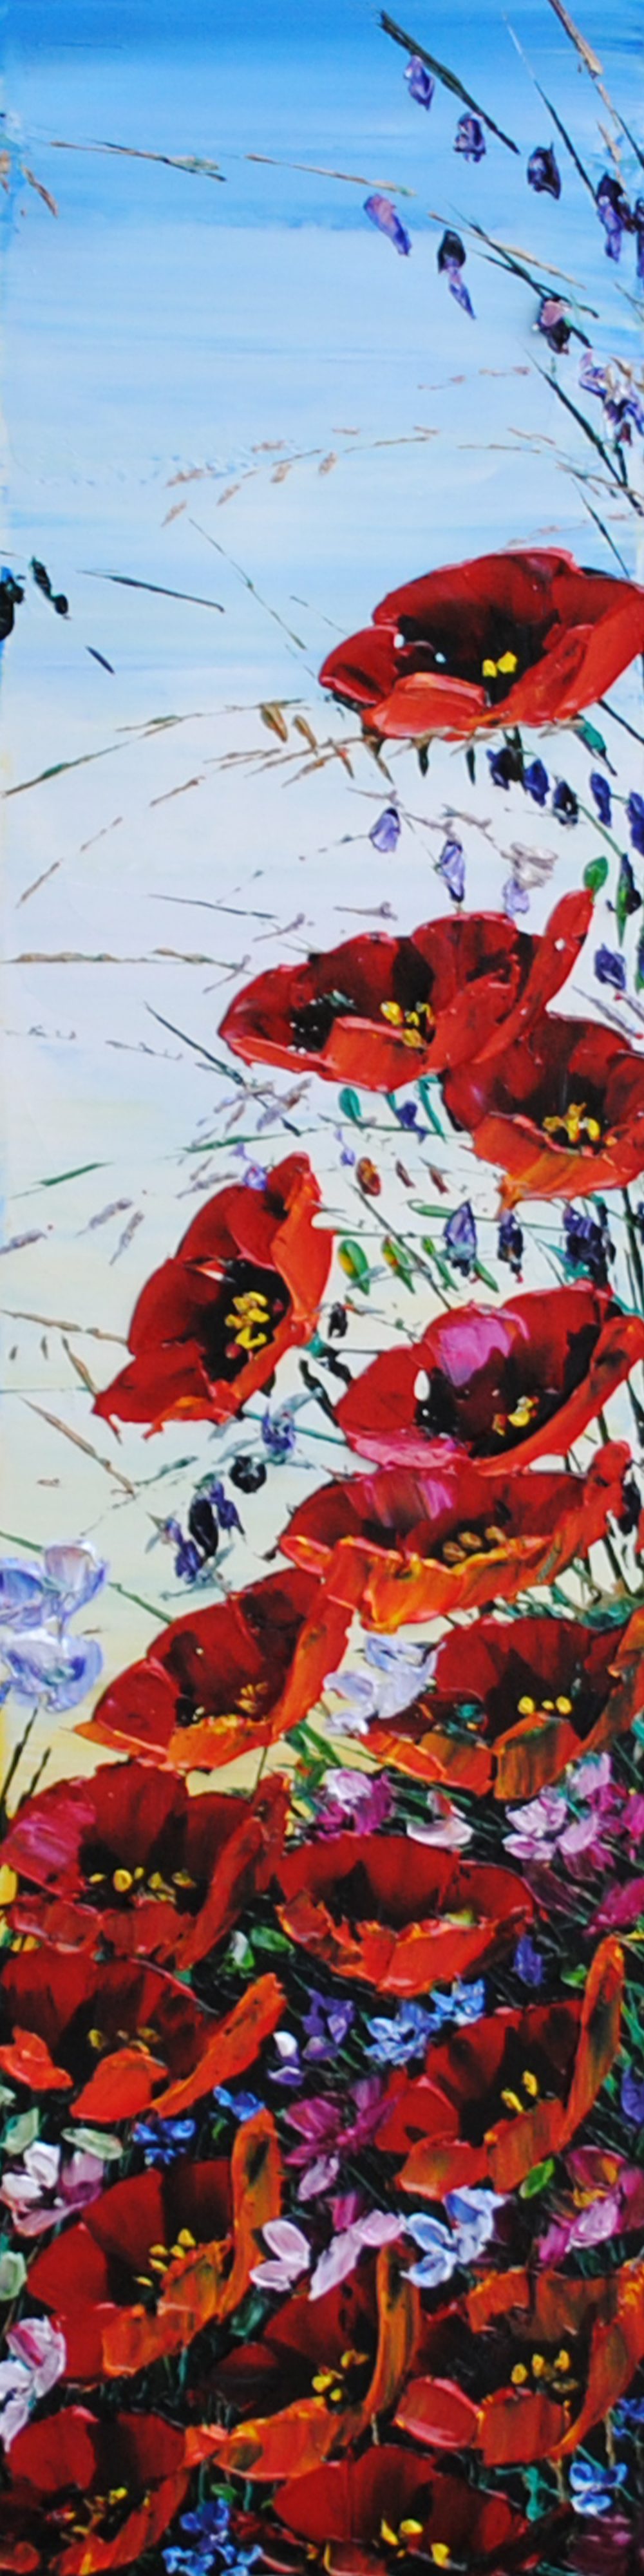 Floral - Poppies (red) by Maya Eventov